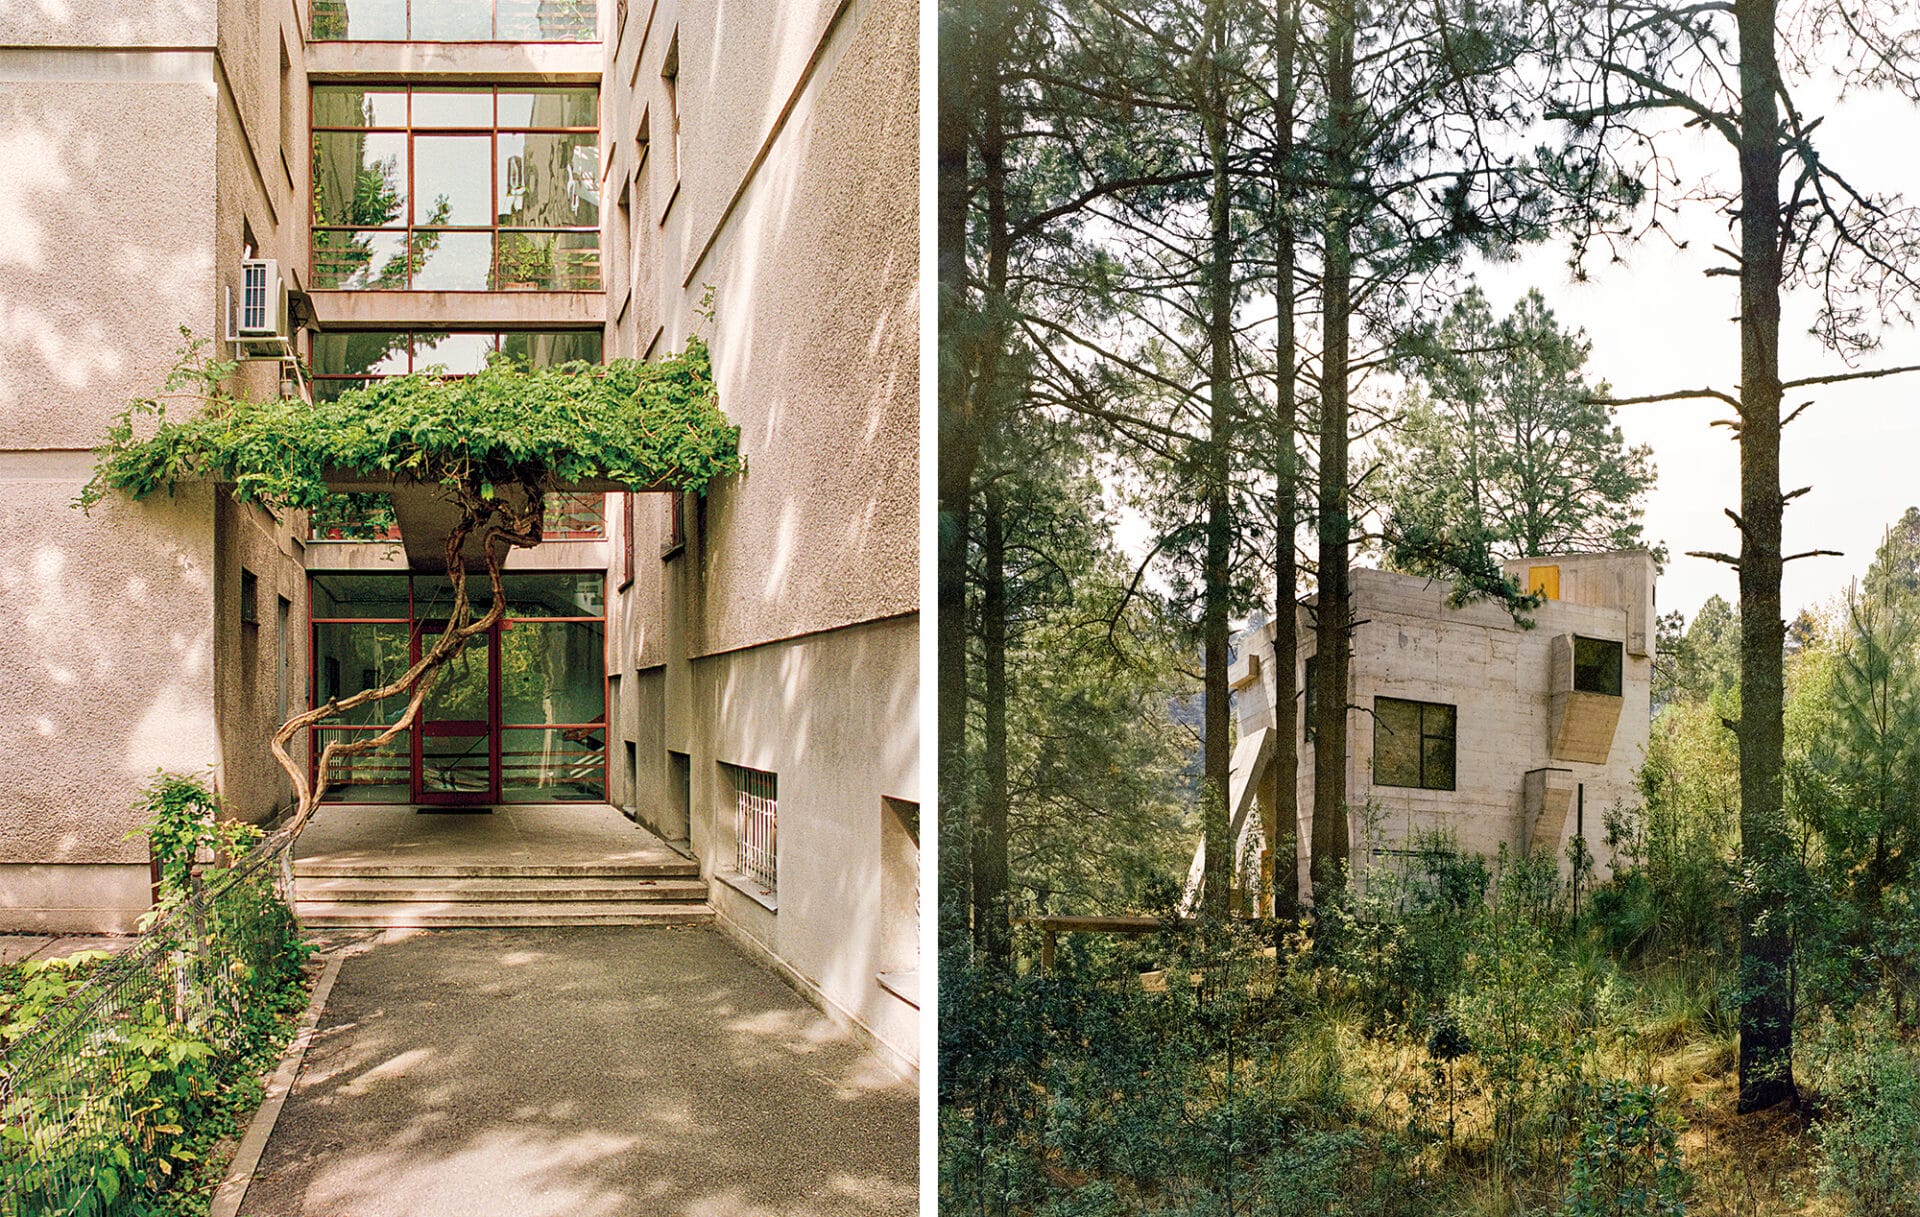 a side-by-side image of two examples of brutalist architecture paired with greenery, with the left image being an entrance with a large green vine over it, and the image on the right being a small concrete cabin in the woods